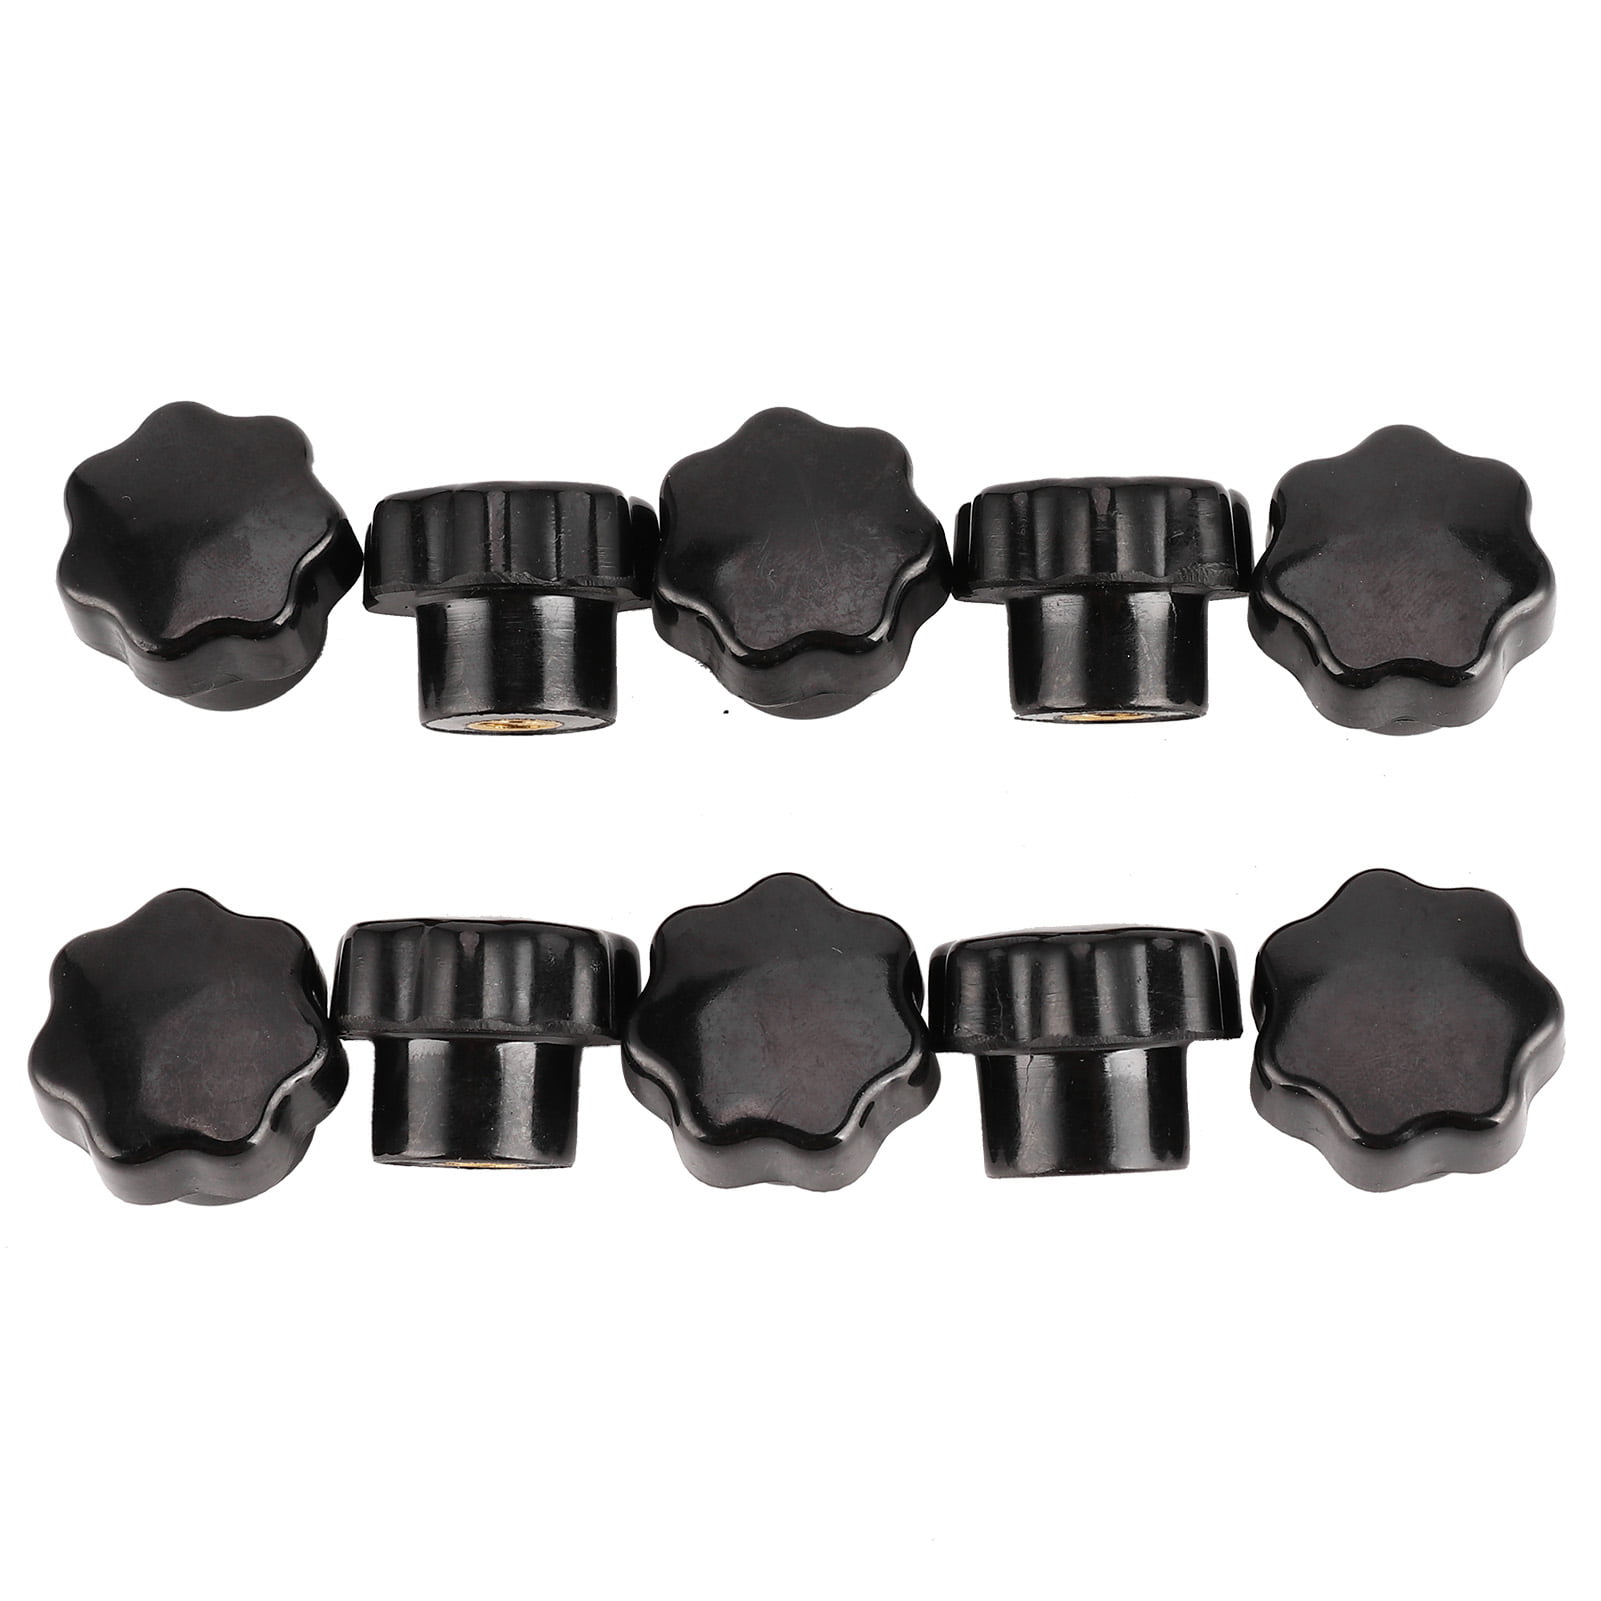 Details about   10Pcs Nuts Knob Grip Handle 7-Star with Female Thread Brass Core M6x25 6mm 